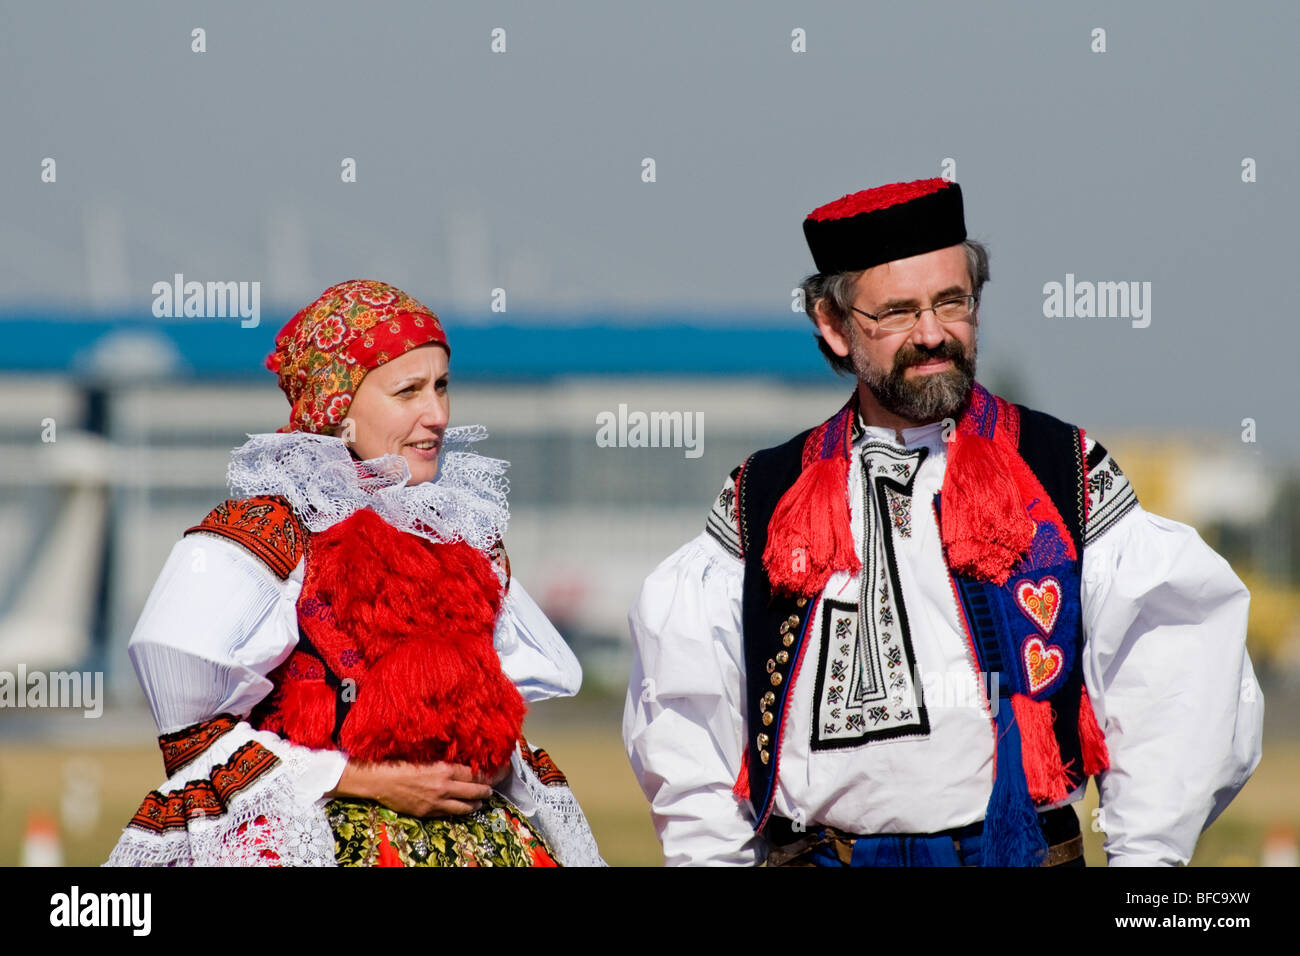 Czechs wearing folk costume wait for the Pope Benedict XVI at the Prague Airport, Czech Republic, 26 September 2009. Stock Photo